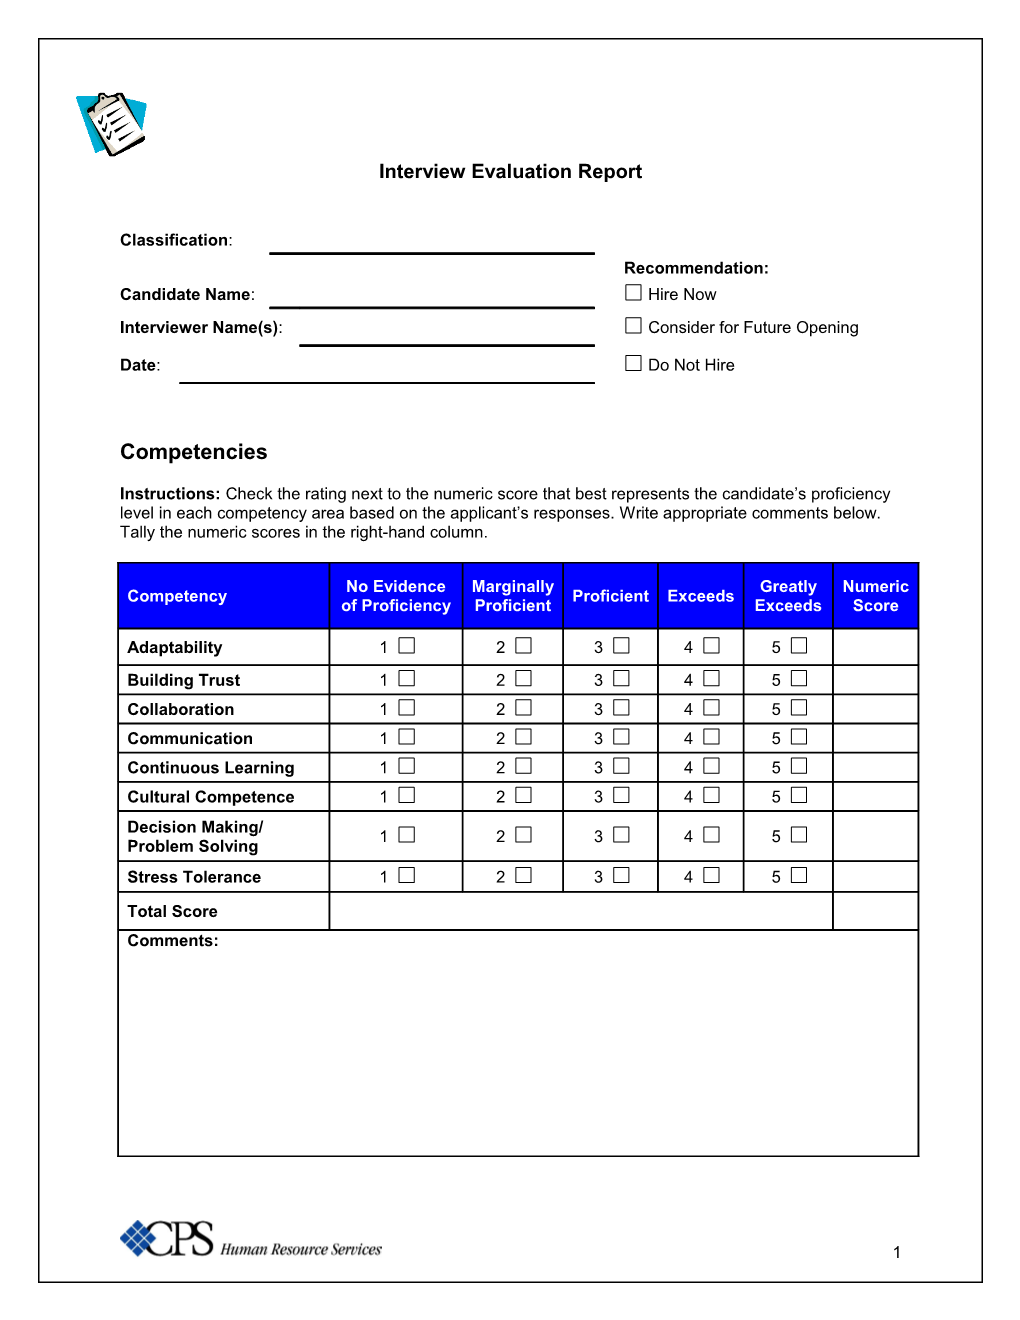 Interview Evaluation Report